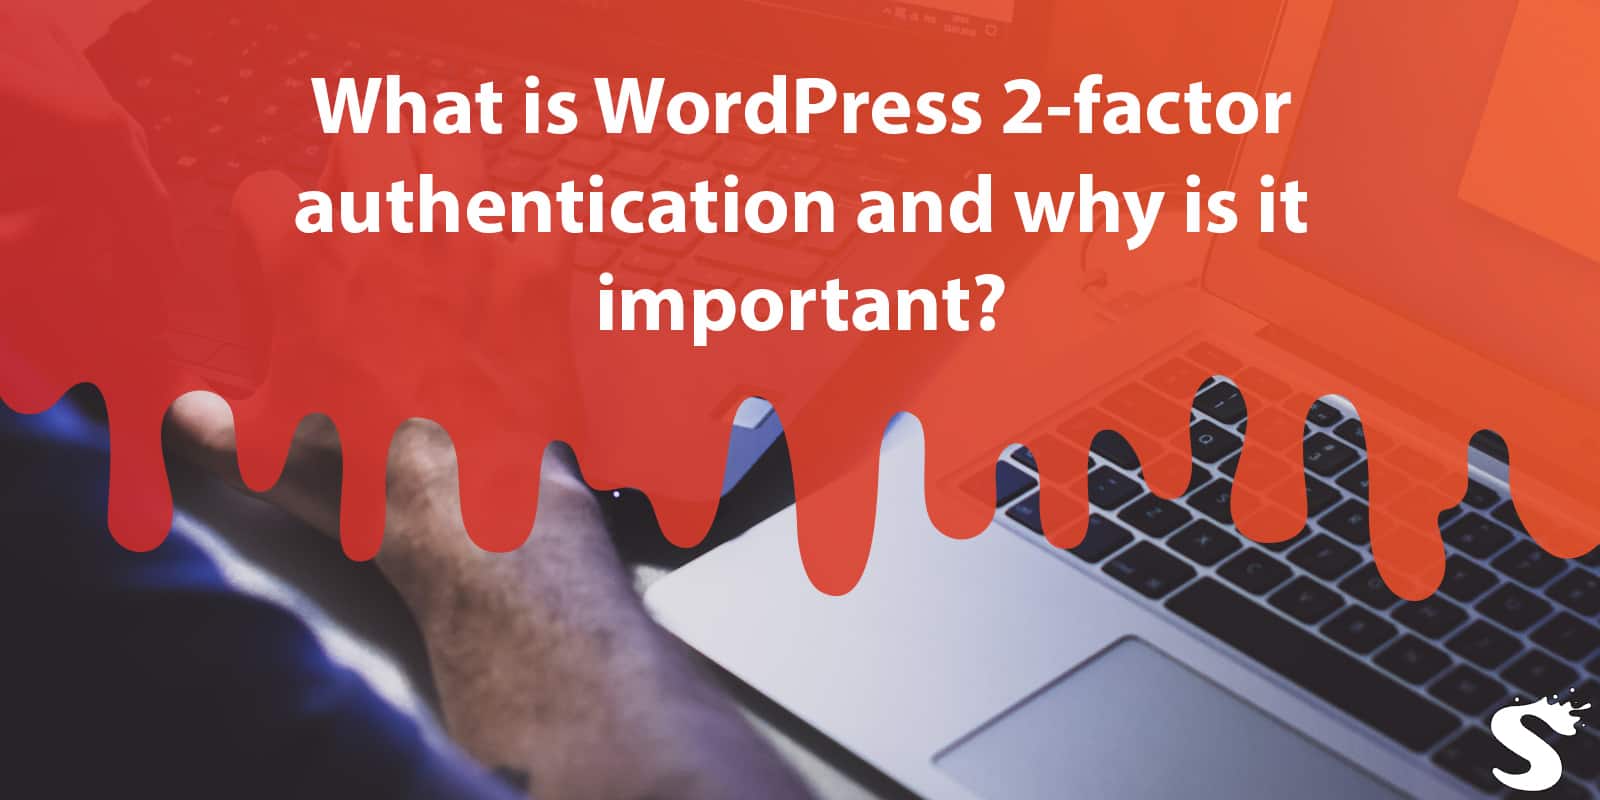 What is WordPress 2-factor authentication and why is it important?